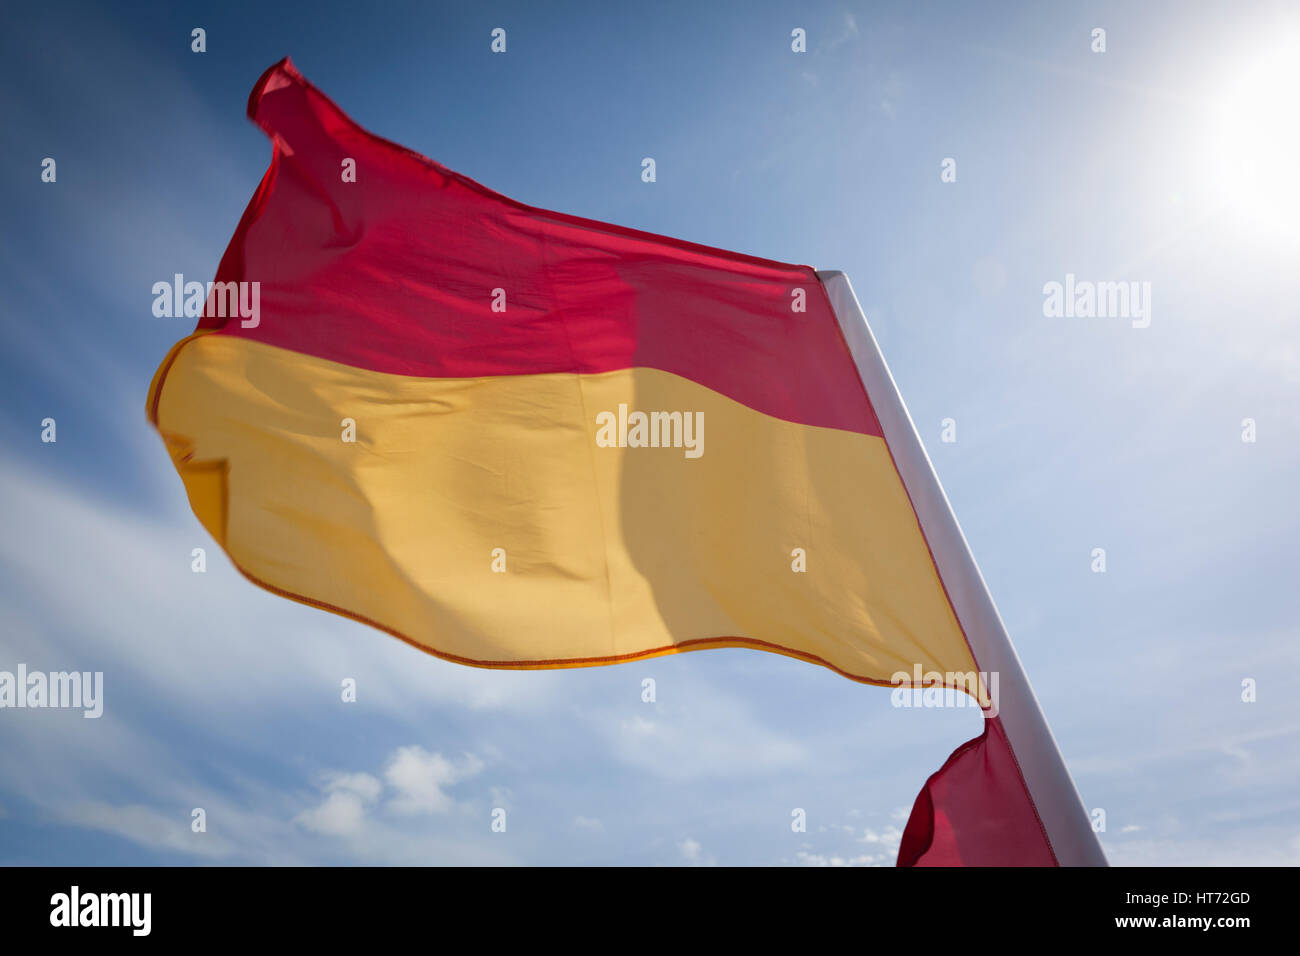 WOOLACOMBE, UK - MAY 19: A red and yellow safety flag fluttering in the wind against a bright blue sky at Woolacombe beach on 19th May 2011. The flag  Stock Photo